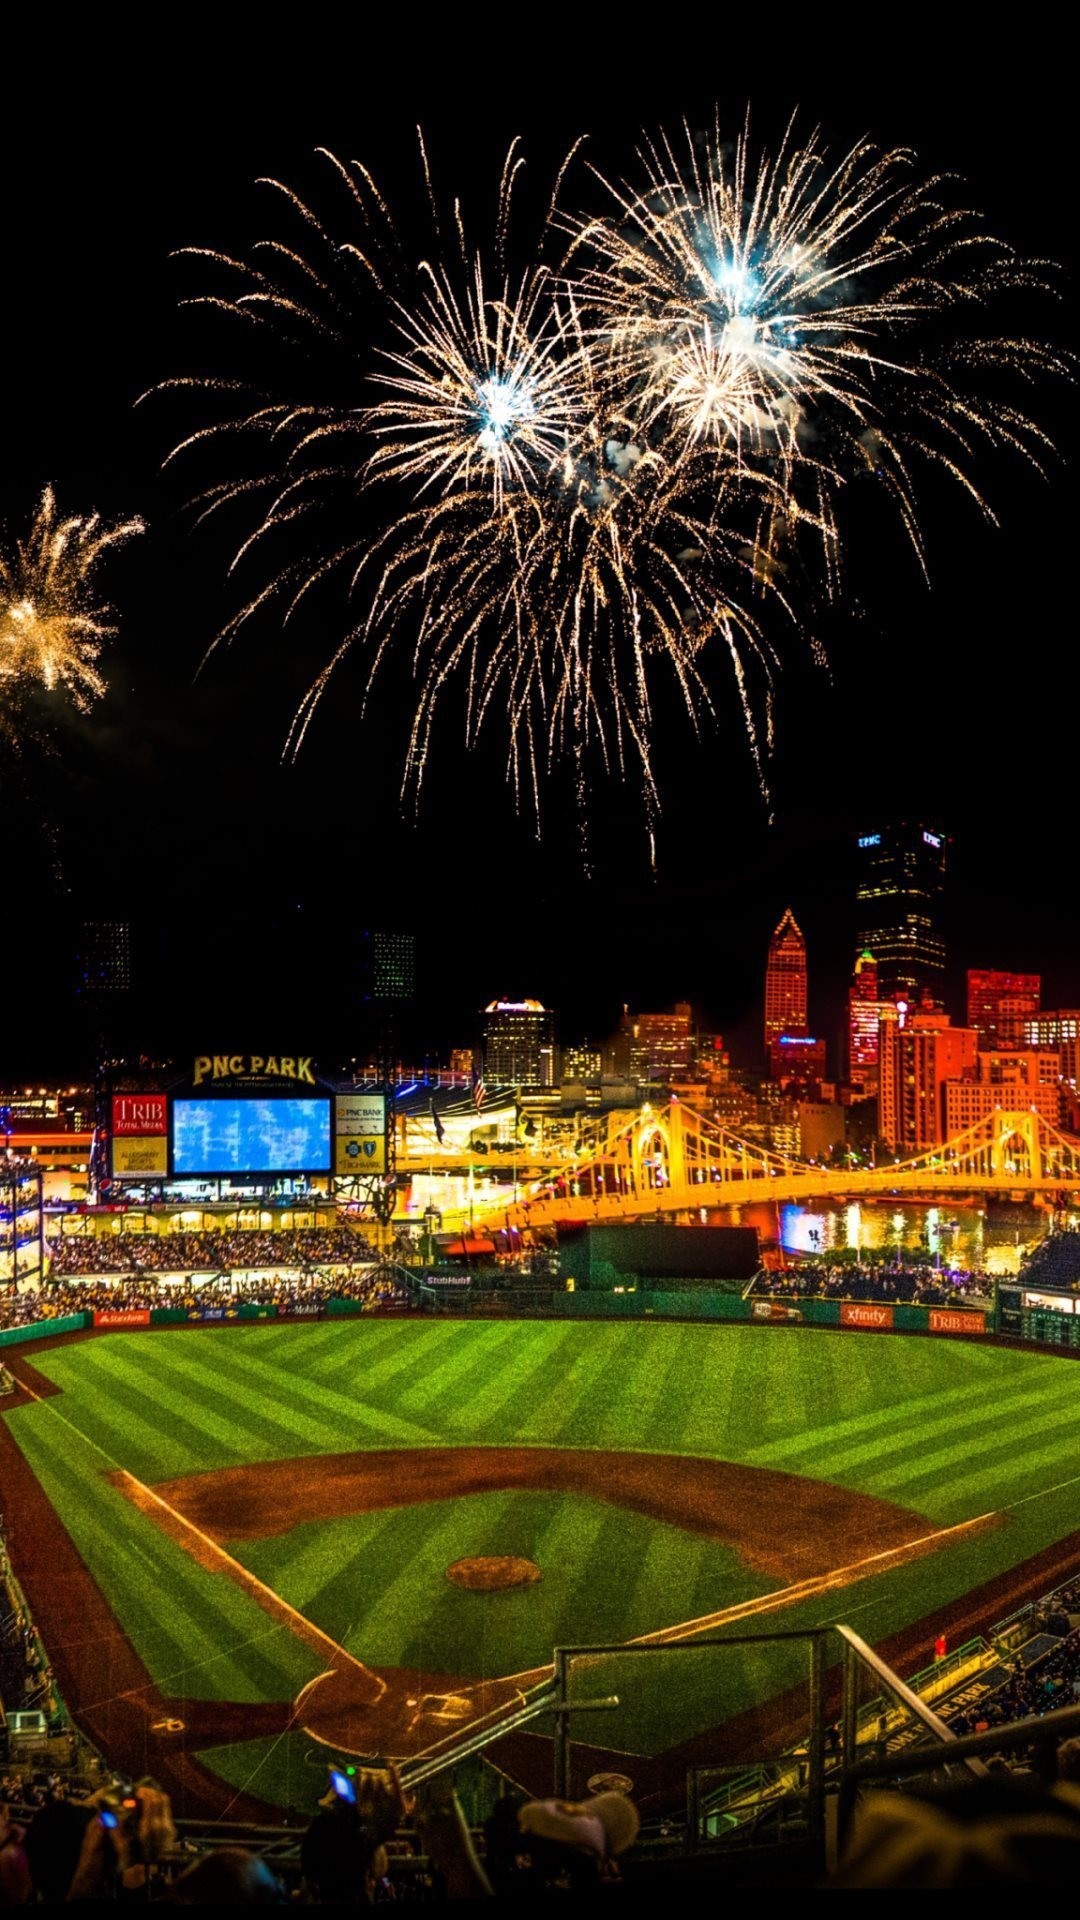 1080x1920 Baseball stadium with fireworks in the night